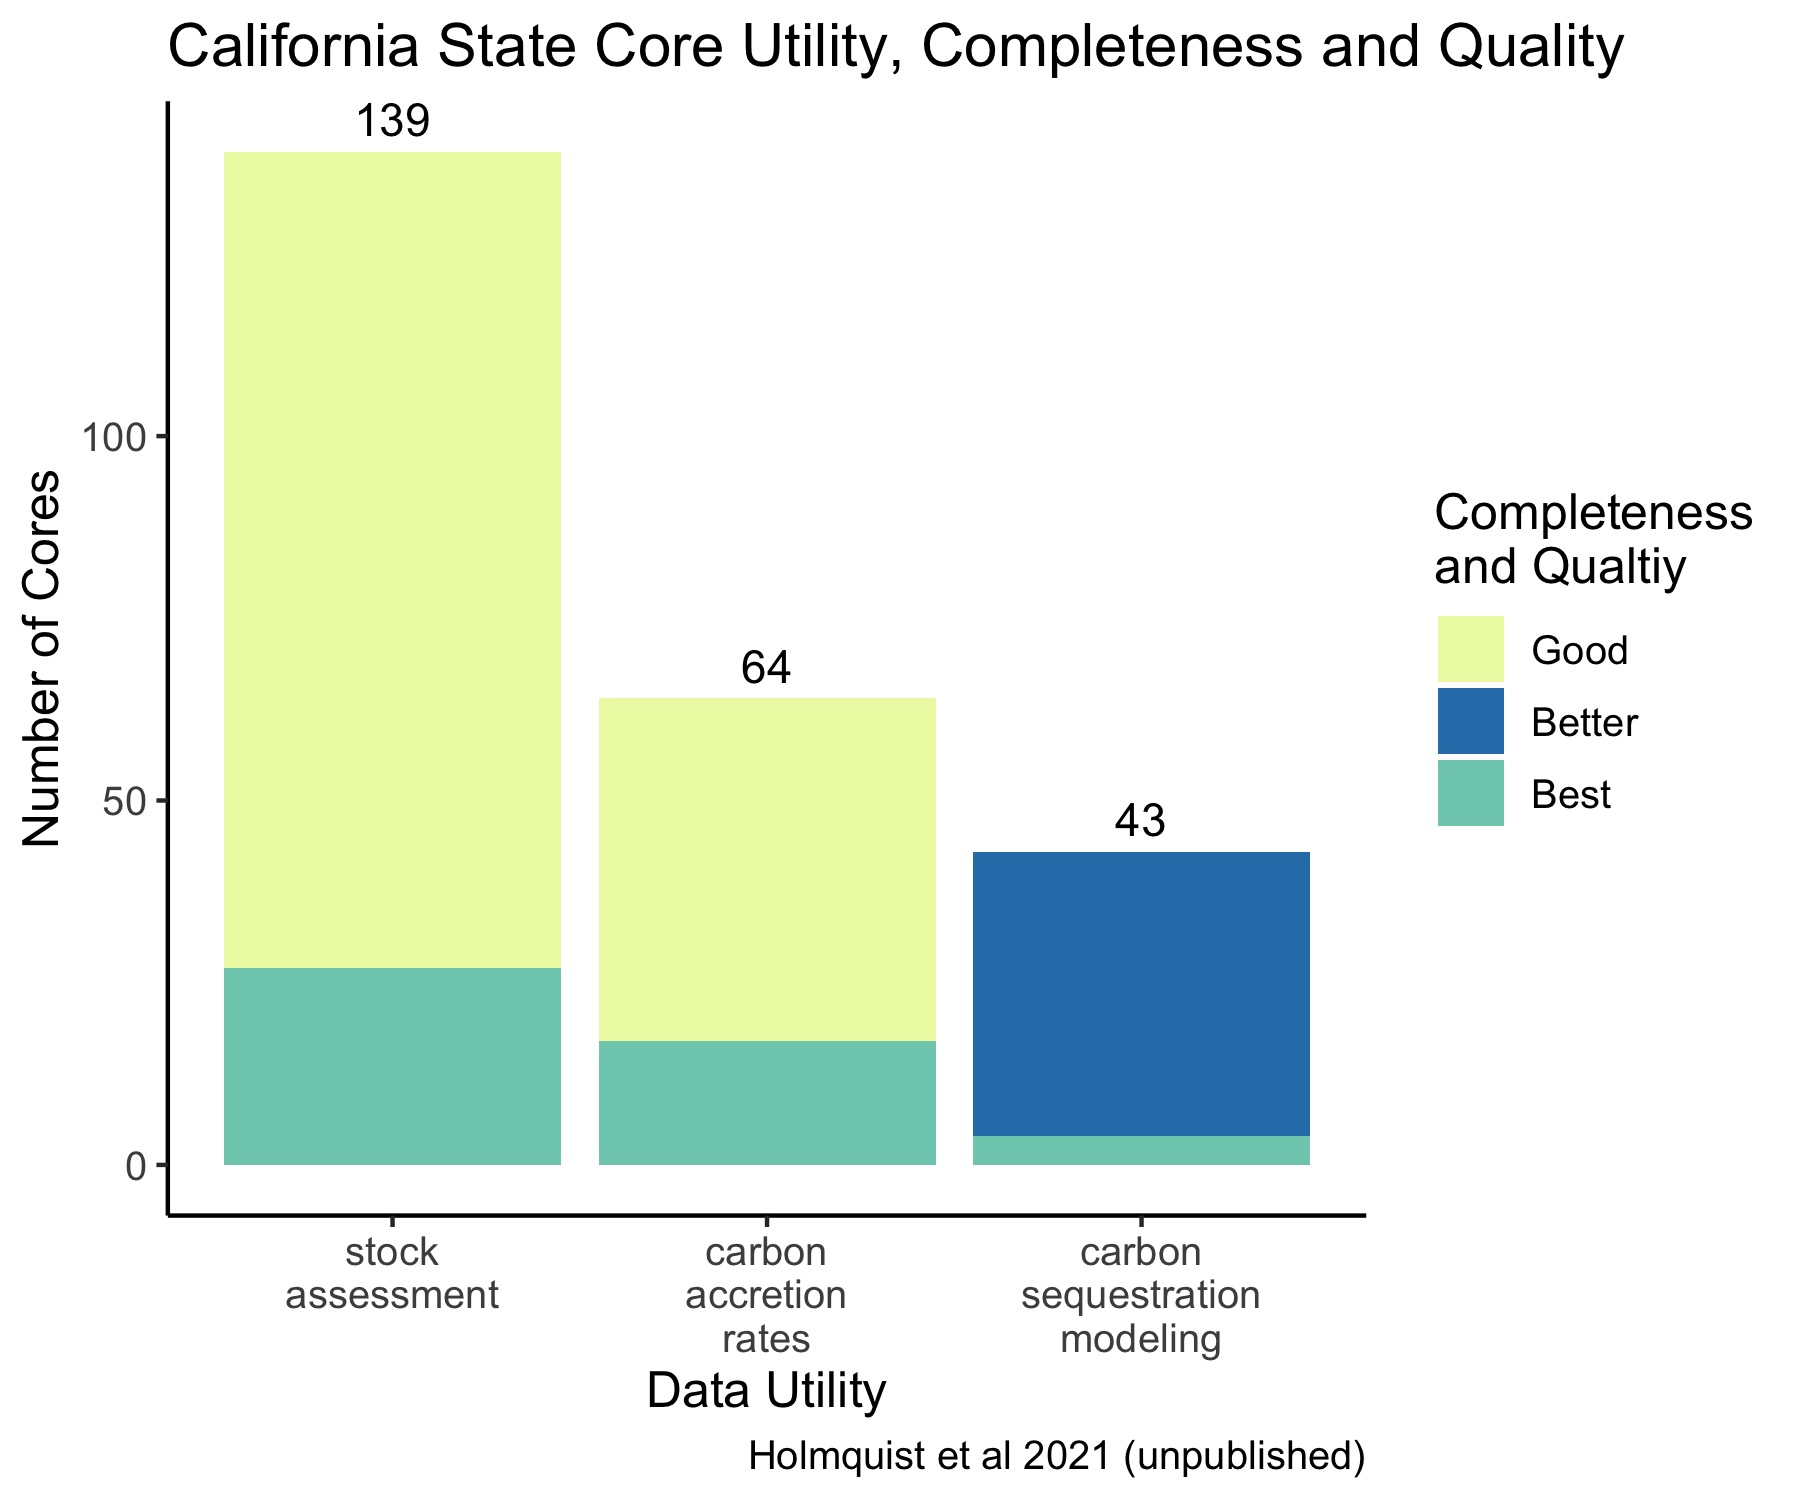 California State Core Data Utility, Completeness, and Quality.